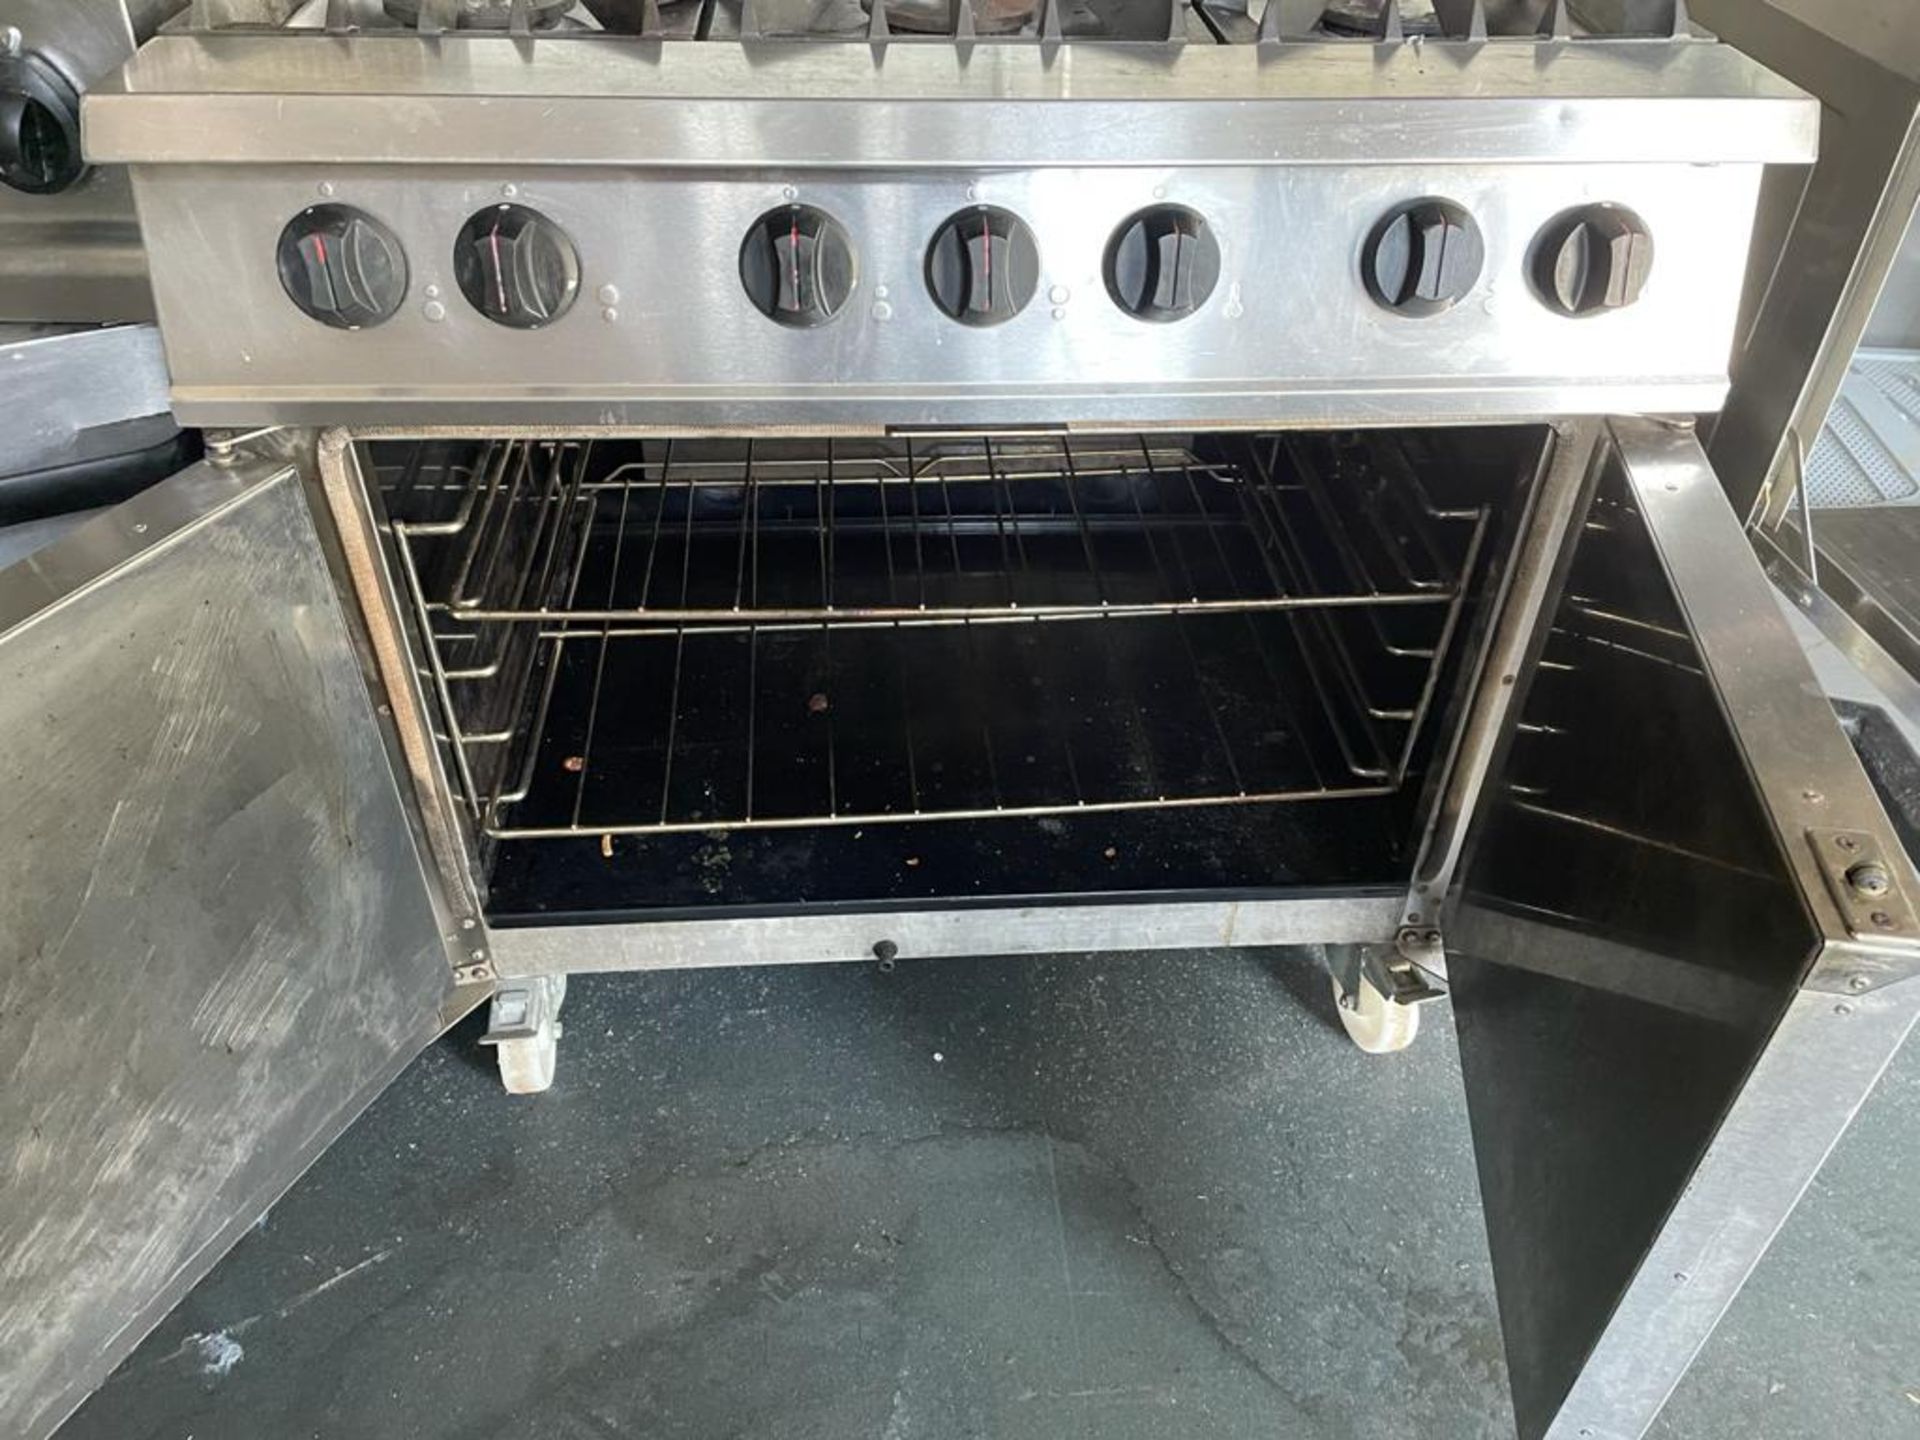 1 x Falcon Dominator 6 Burner Range Cooker With Stainless Steel Exterior - CL667 - Location: - Image 2 of 5